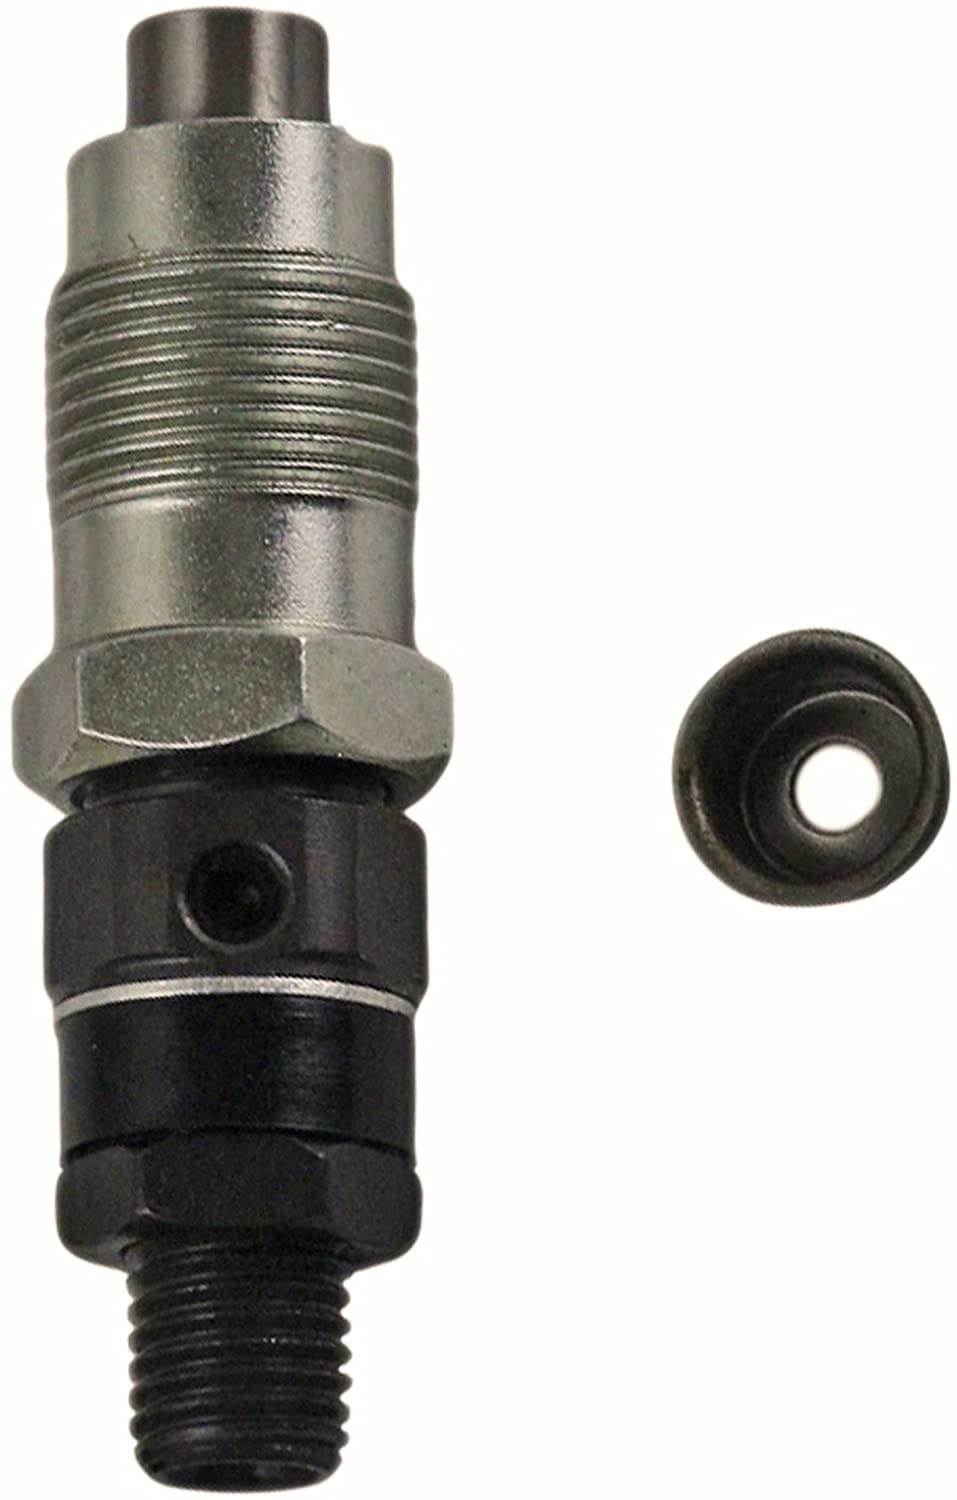 Fuel Injector Nozzle 7023120 6722147 for Bobcat 331 334 337 341 5600 645 743 751 753 763 773 7753 1600 S150 S160 S175 S185 T190 - KUDUPARTS